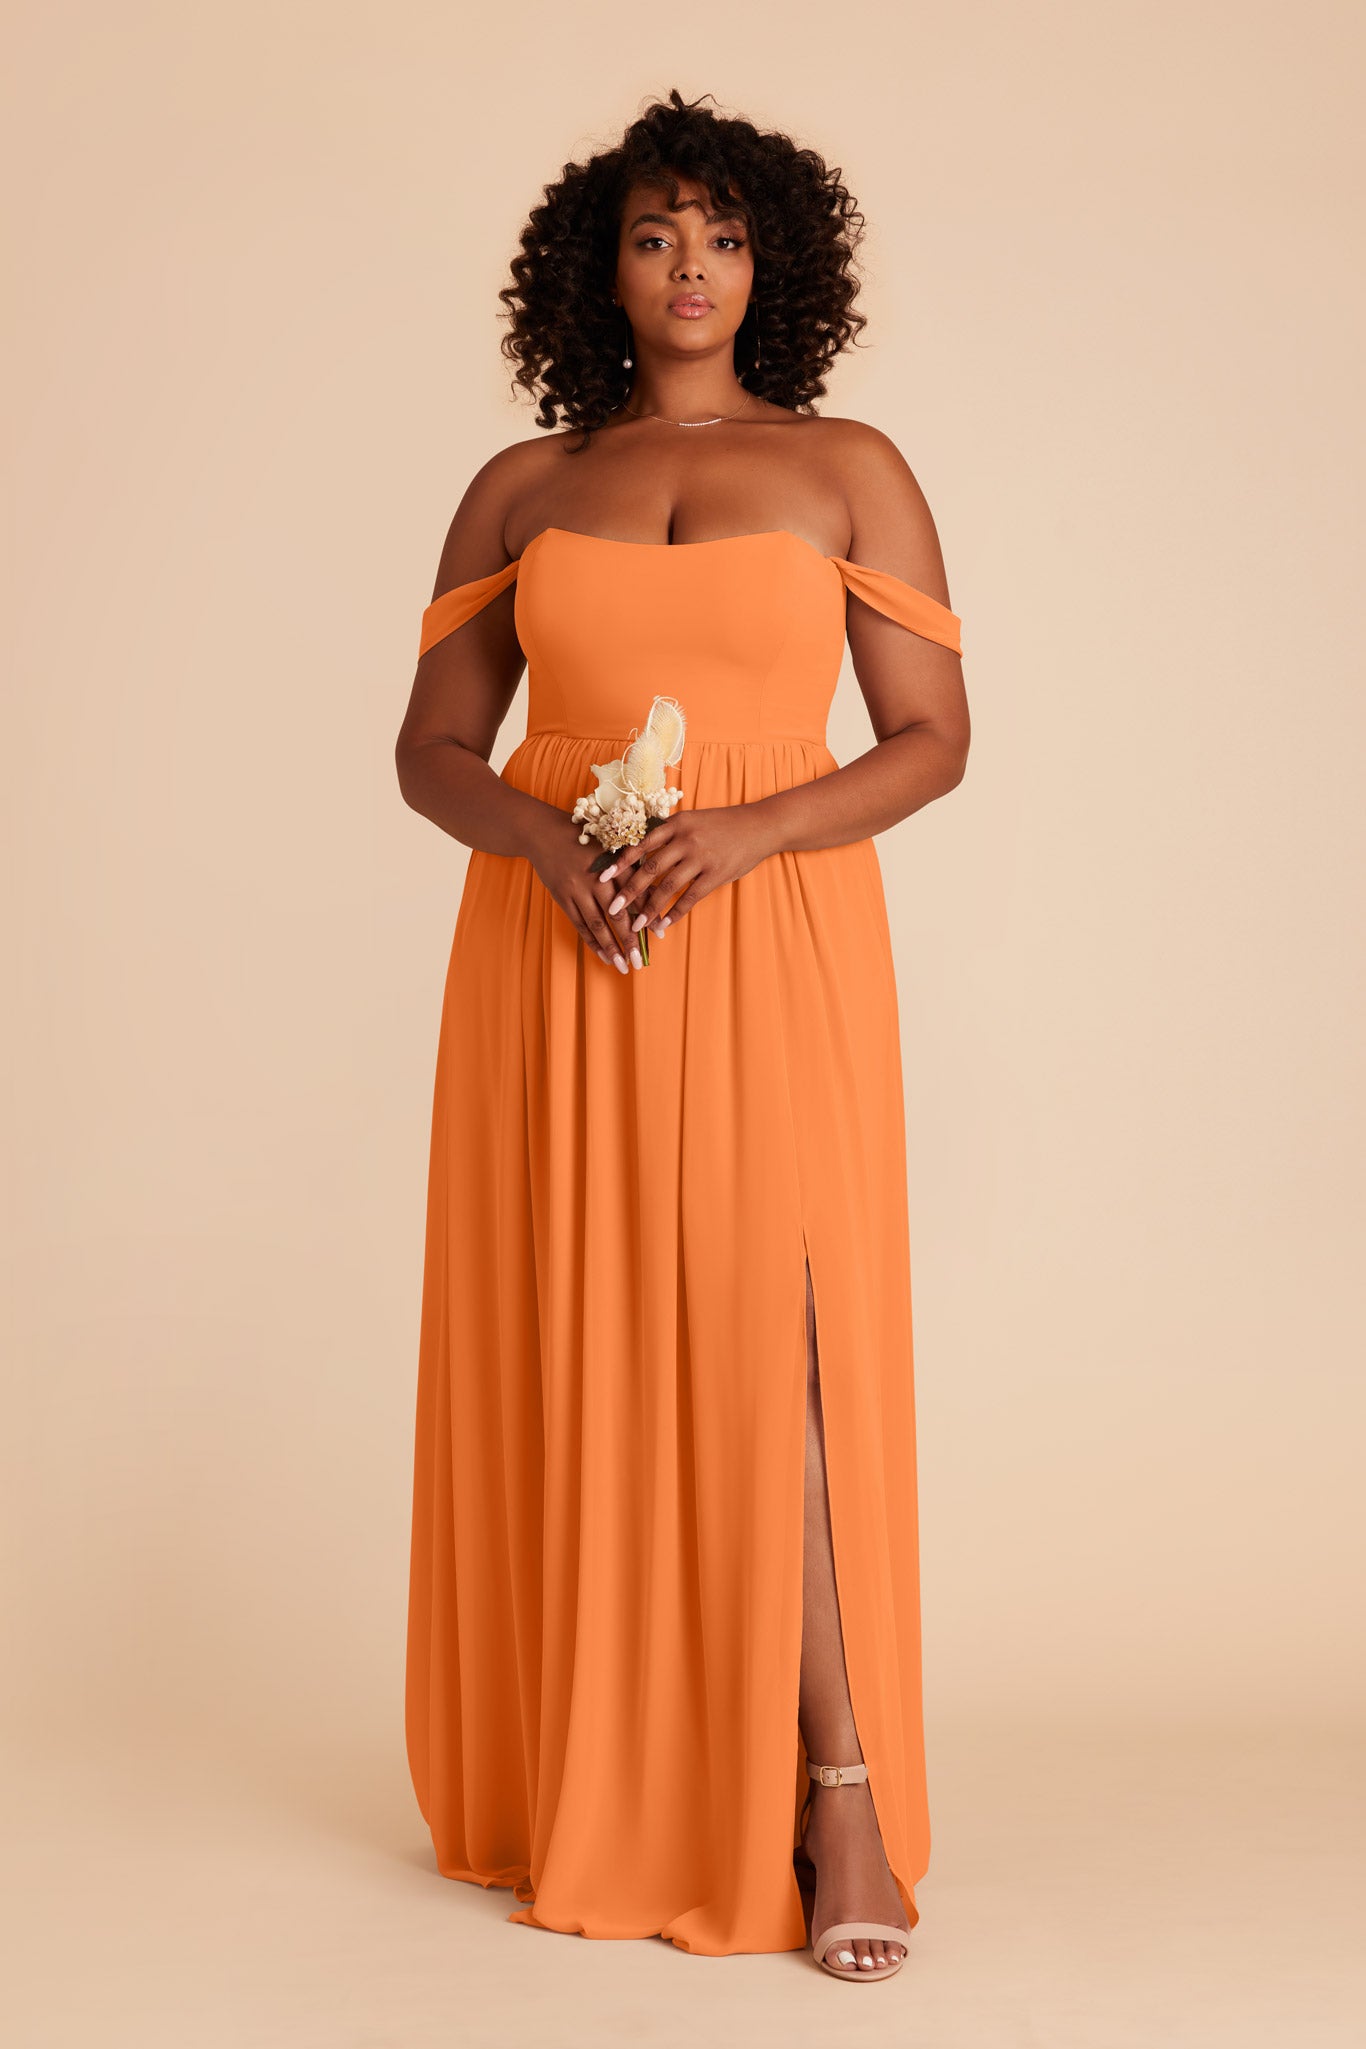 Apricot August Convertible Dress by Birdy Grey